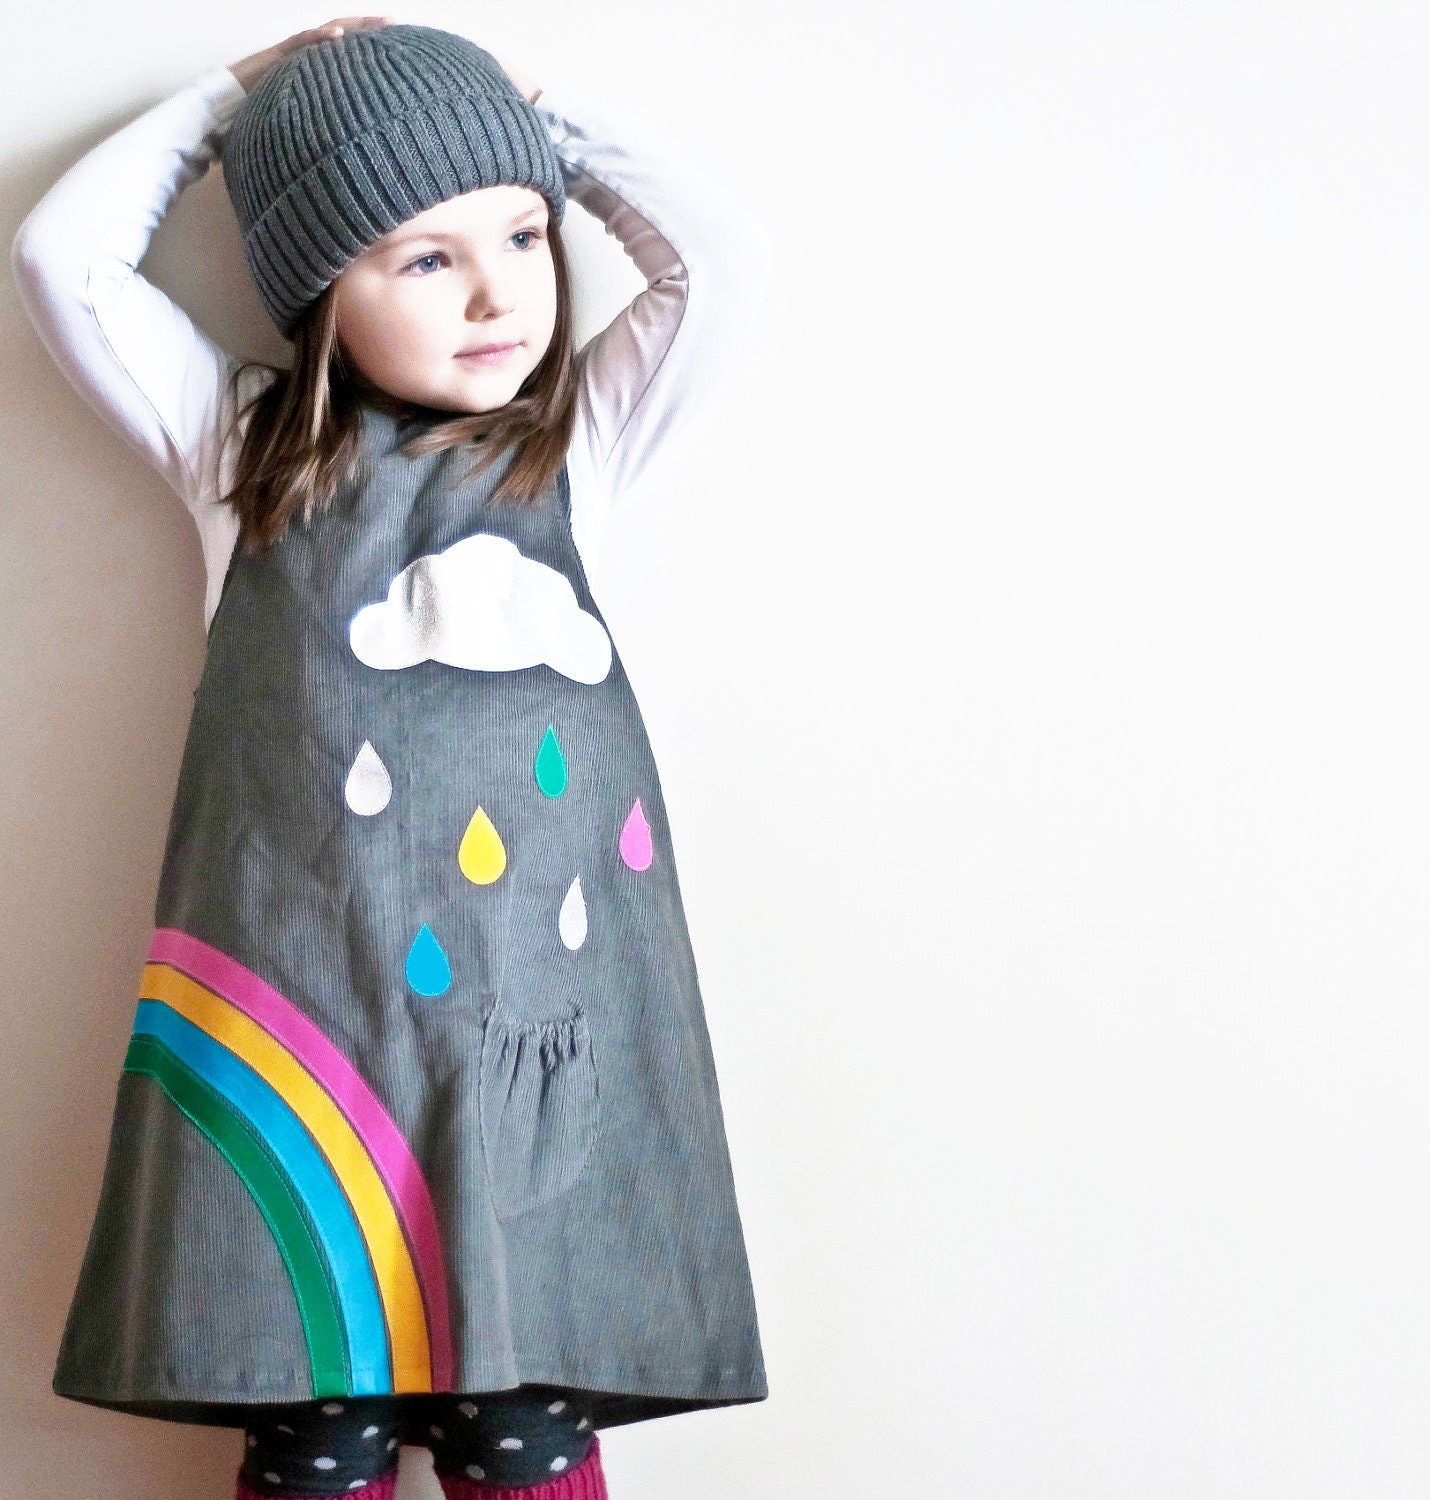 RAINBOW & silver cloud- Little girls dress-grey corduroy age 6M to 6T-Wild Things Dresses